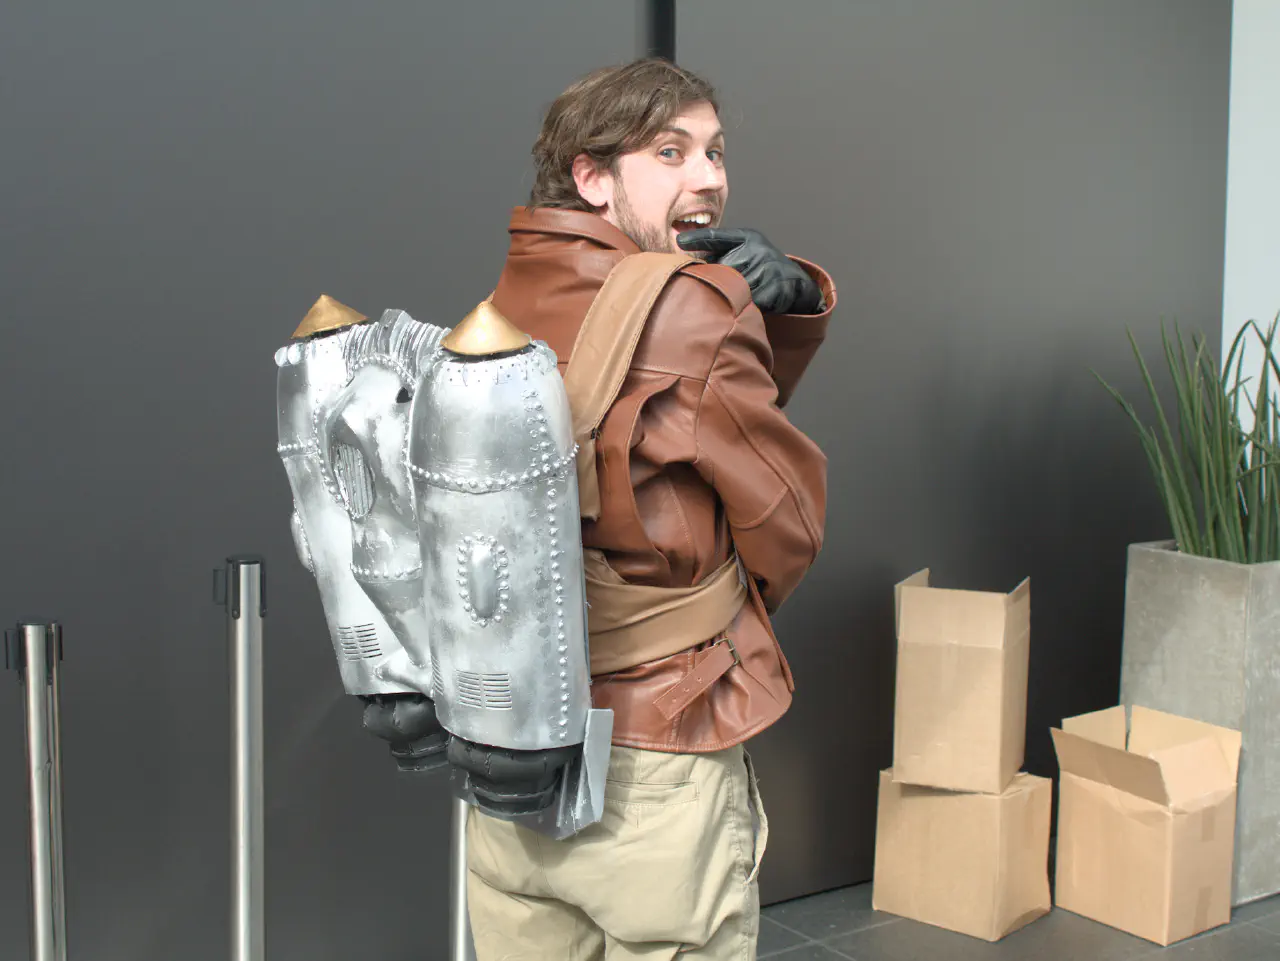 A bearded individual in a brown leather jacket facing away from the camera, but turning around to point very enthusiastically at the rocket pack they are wearing on their back.